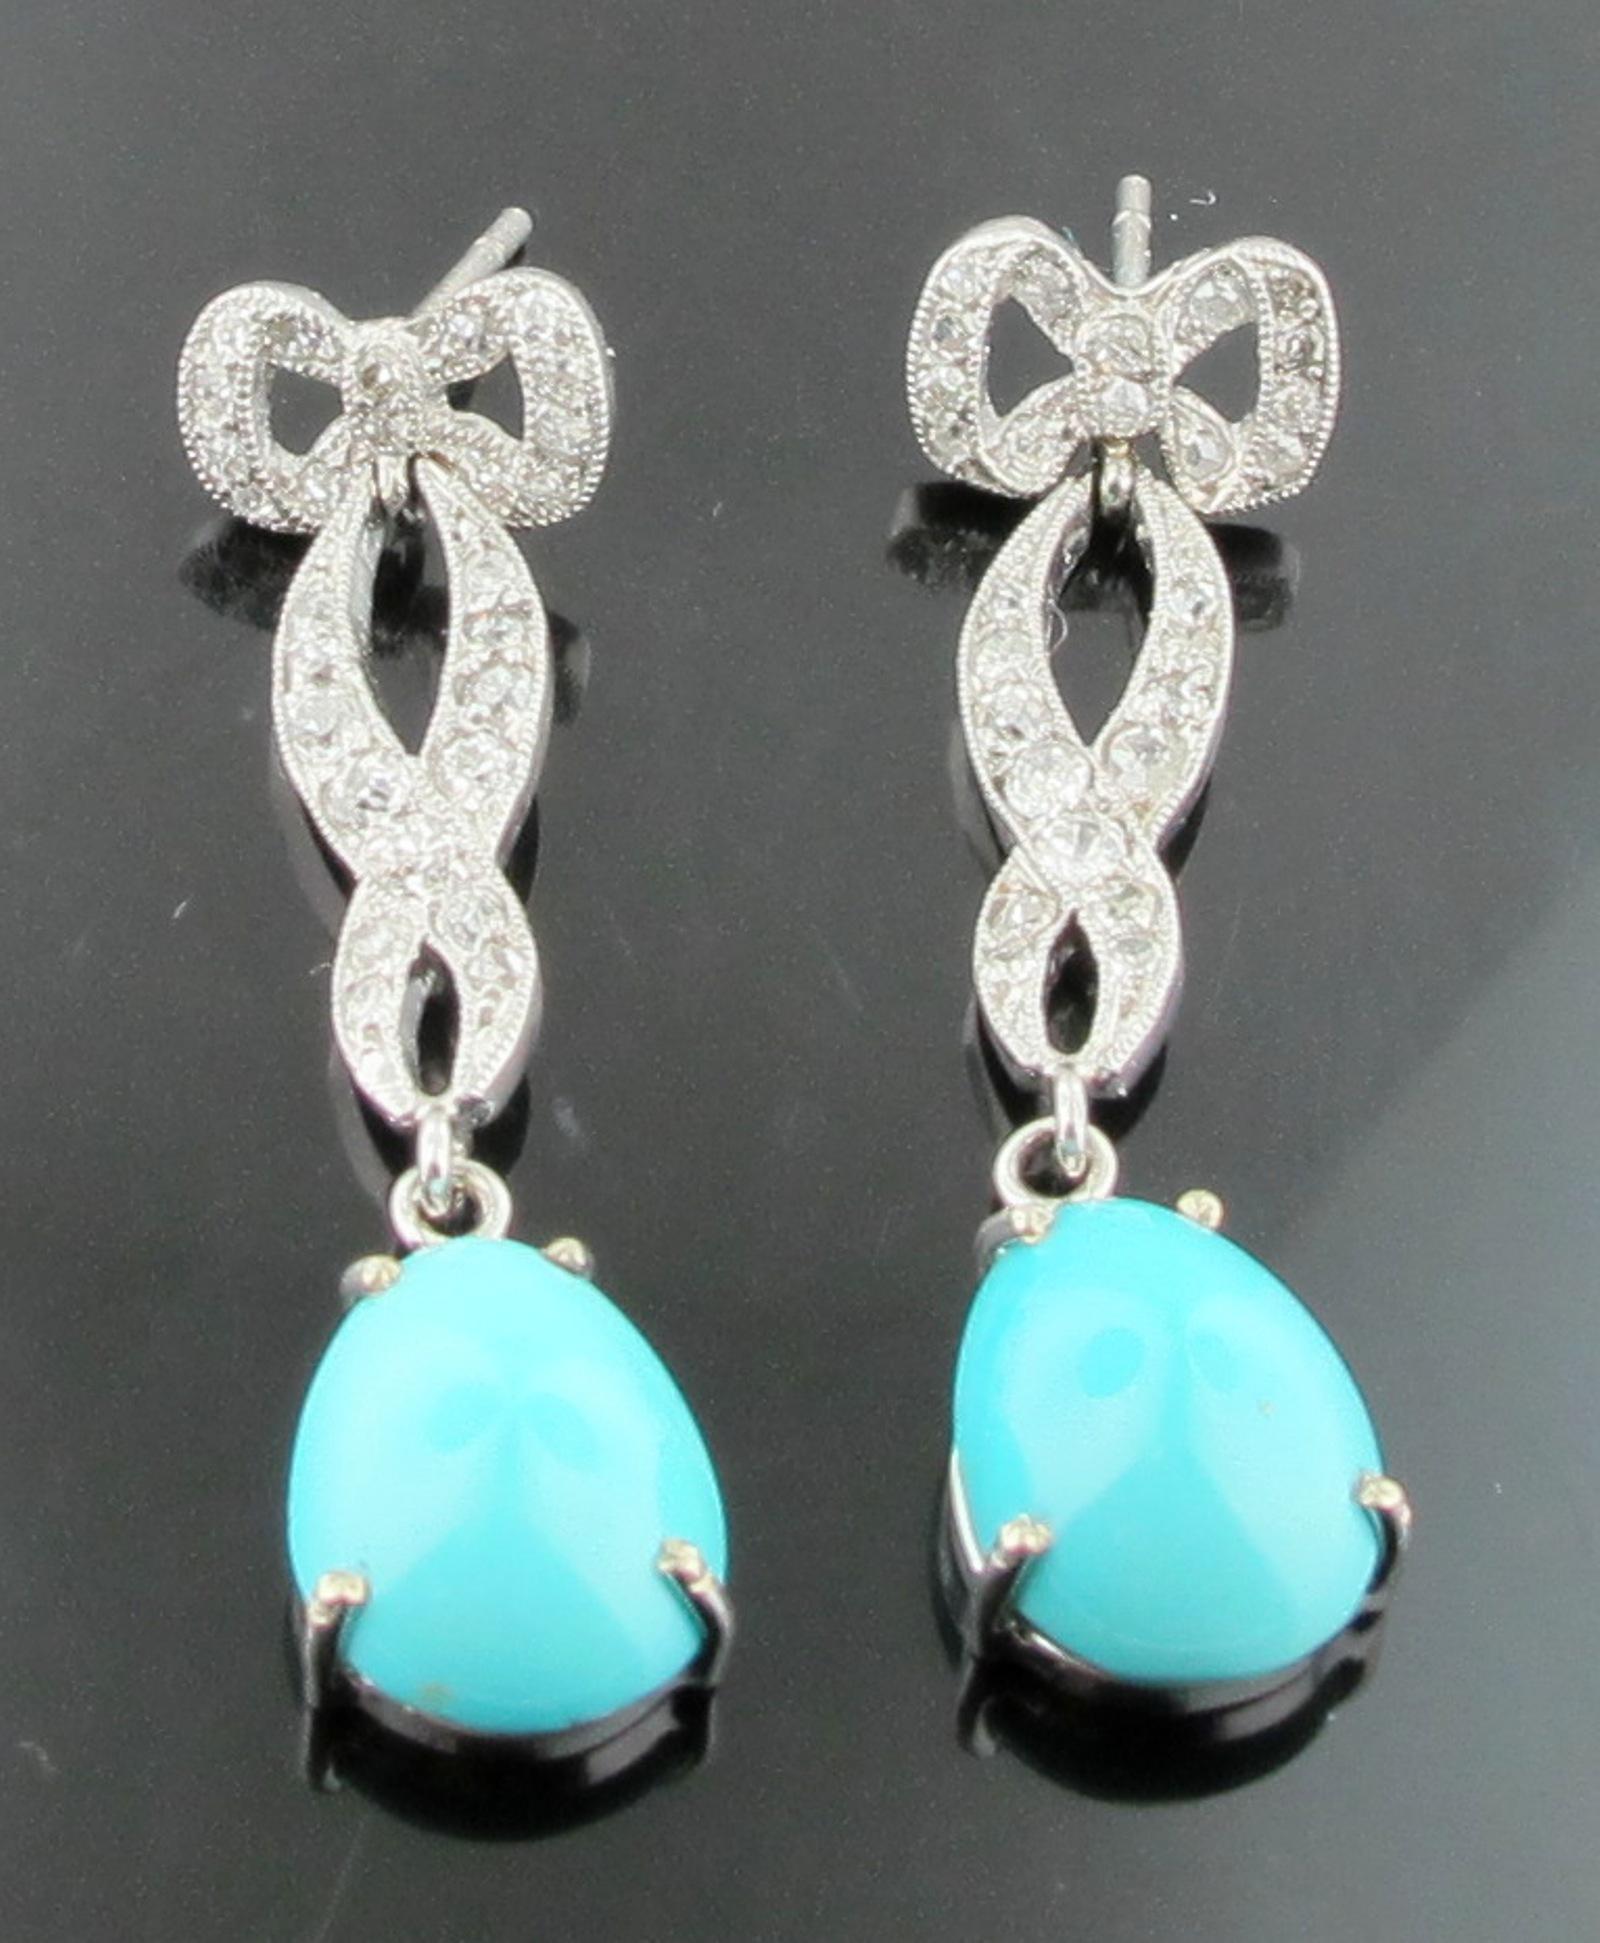 Round Cut Vintage Diamond and Turquoise Drop Earrings